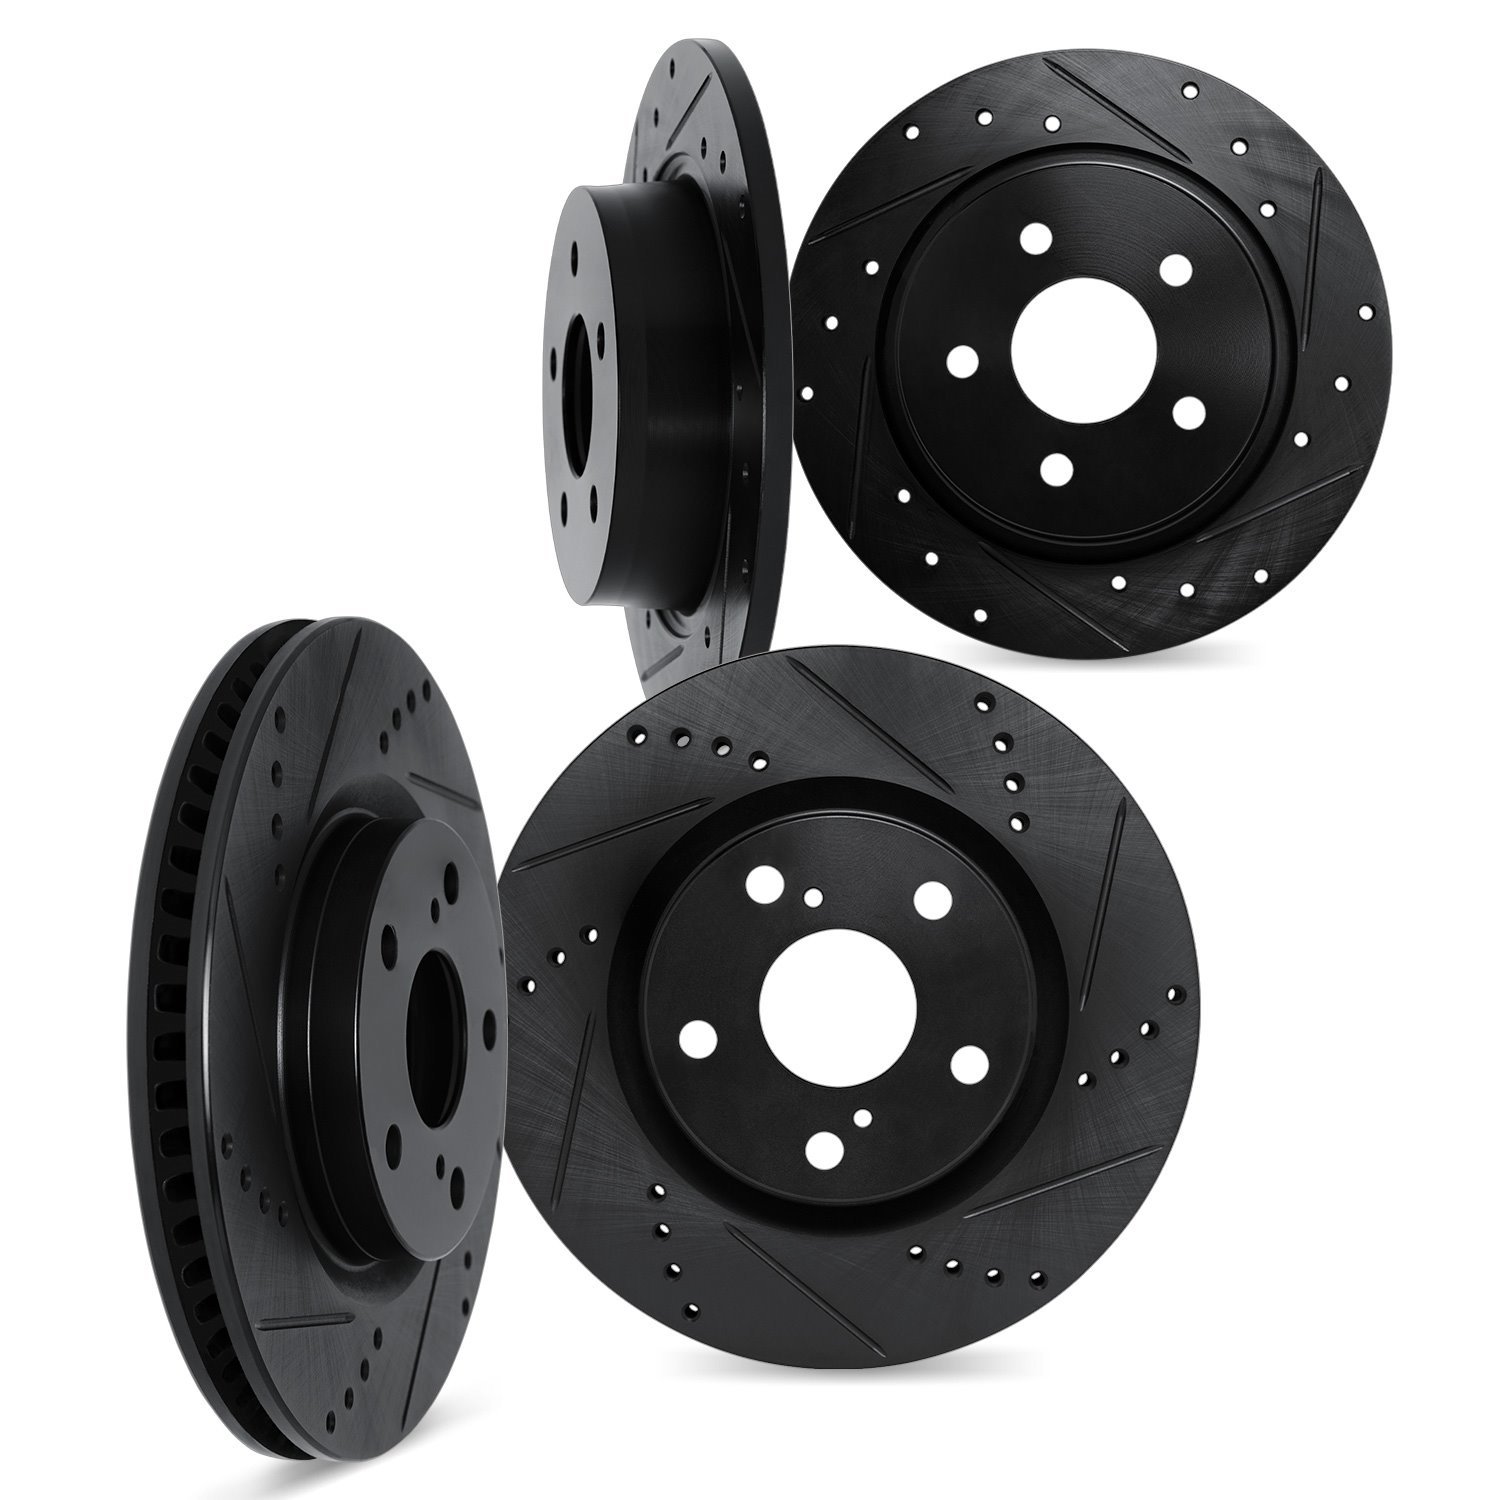 8004-74005 Drilled/Slotted Brake Rotors [Black], 2005-2018 Audi/Volkswagen, Position: Front and Rear